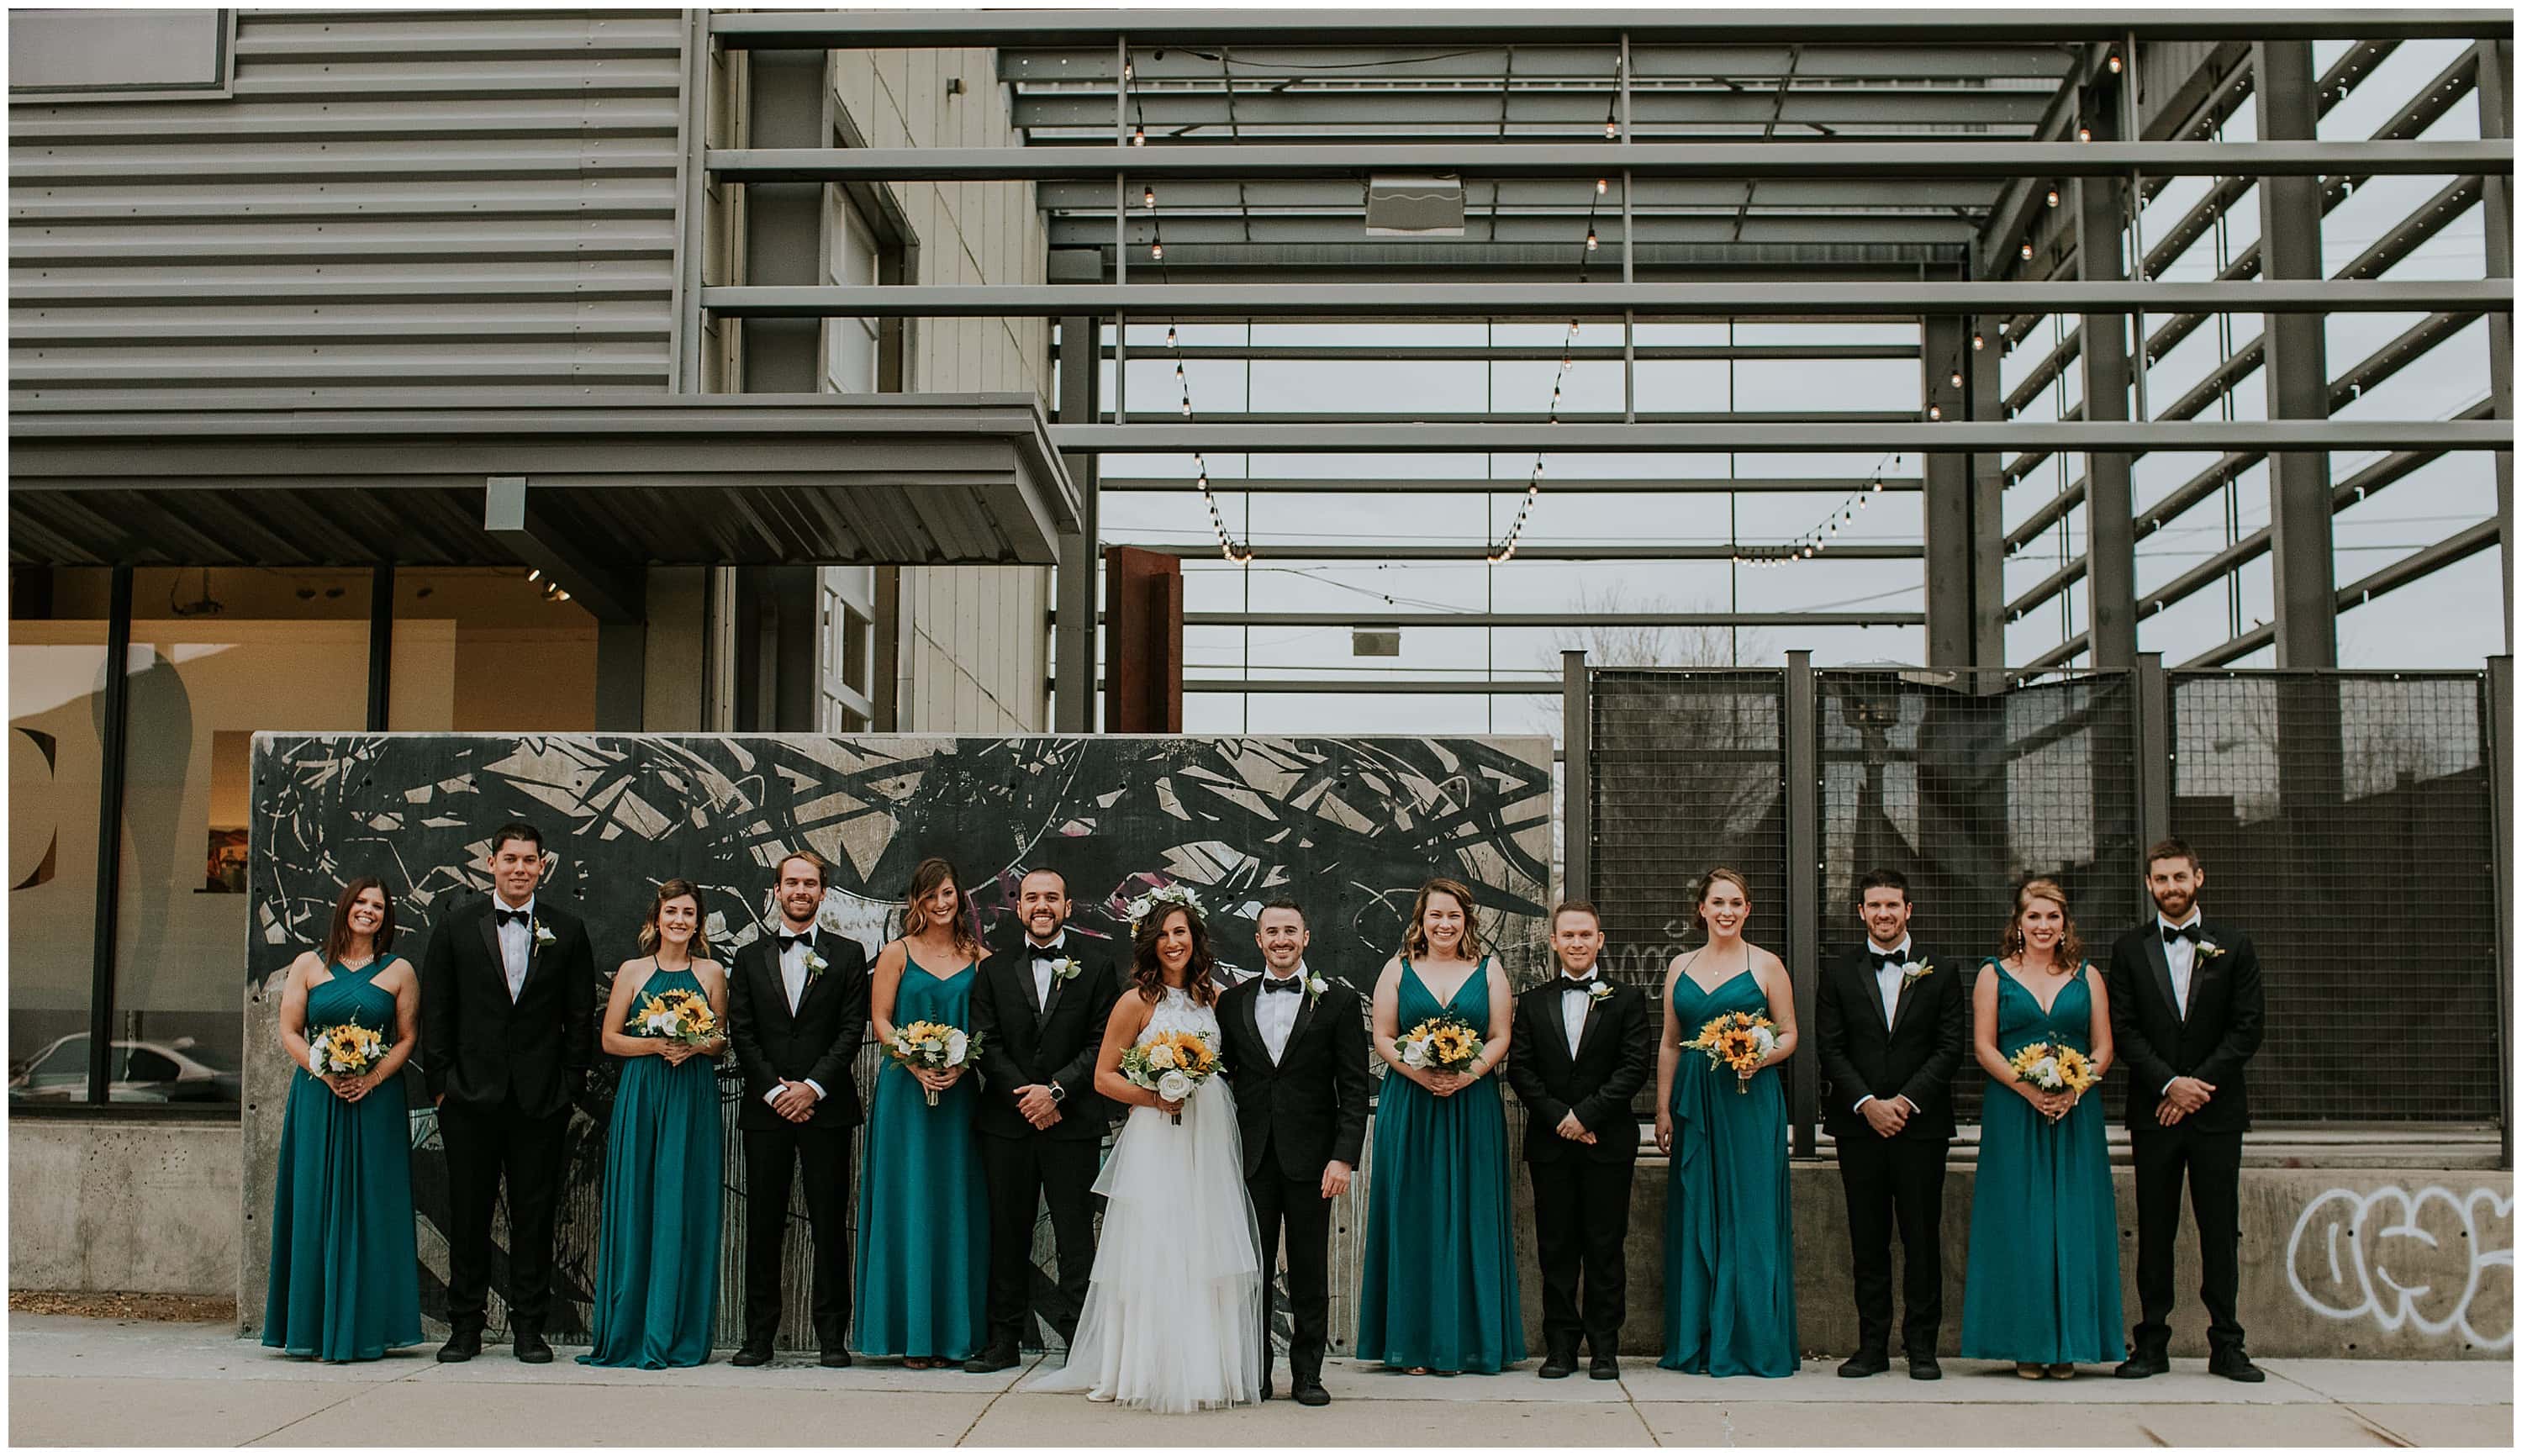 Space Gallery Denver, Space Gallery wedding, Denver Fall wedding, Fall Space Gallery wedding, Downtown Denver wedding, Dance party wedding, Sunflower crown, fake wedding flowers, shanna m. photography, teal bridesmaids dresses, Mariachi band, mens tux, glowstick exit, art gallery wedding, 